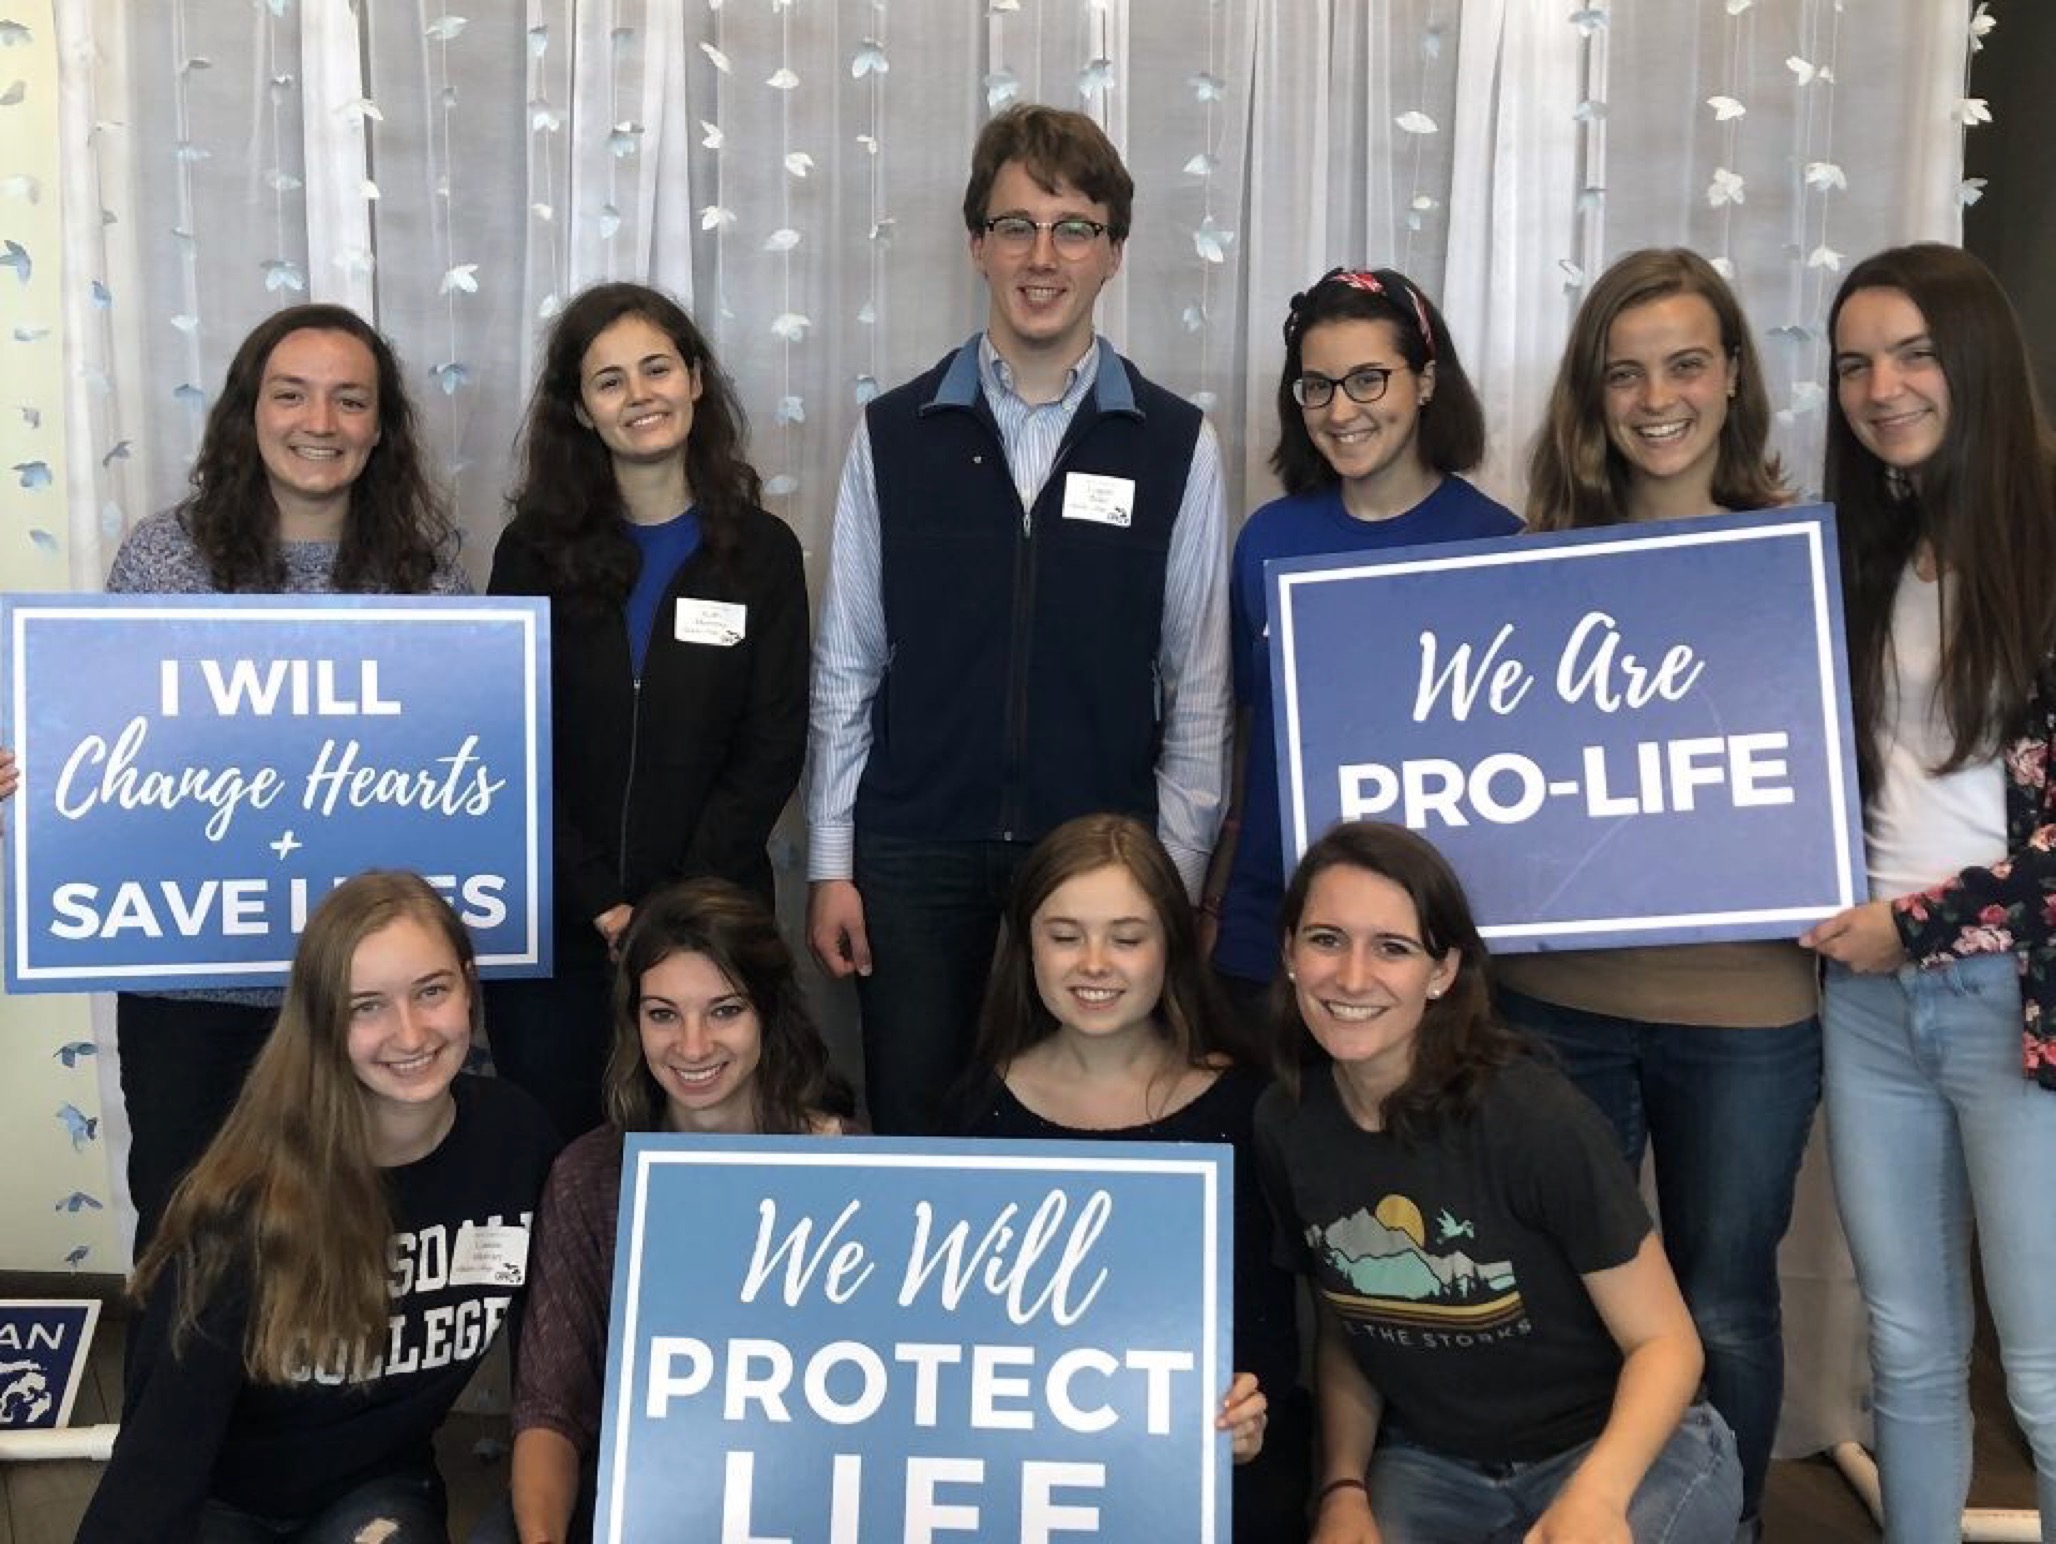 Student Federation funds 2022 March for Life trip